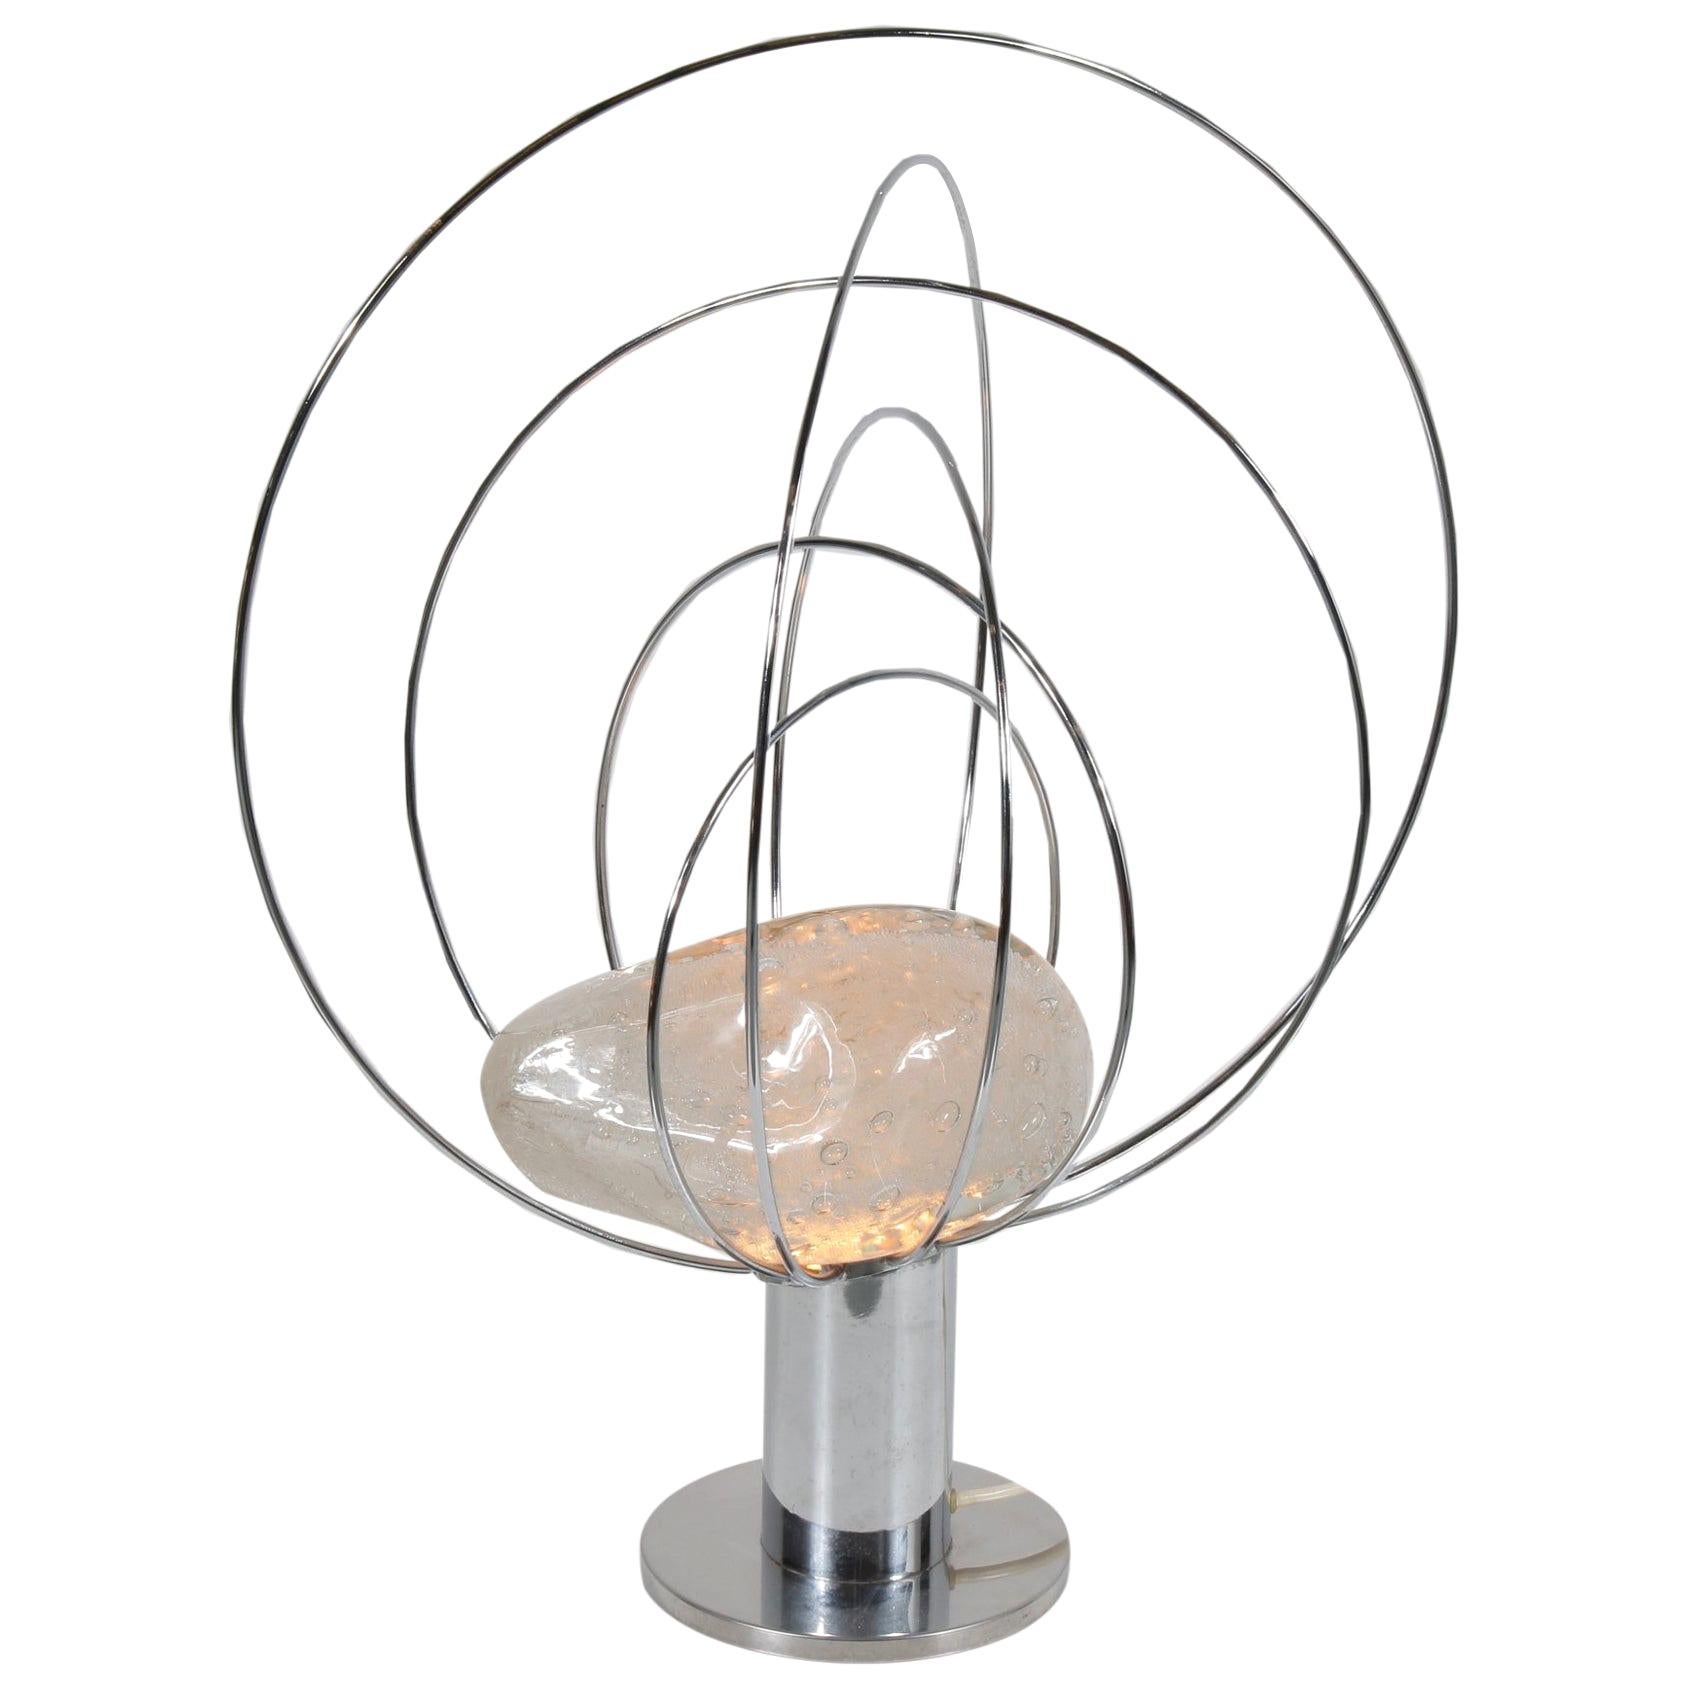 Angelo Brotto Sculptural Table Lamp for Esperia, Italy, 1960 For Sale